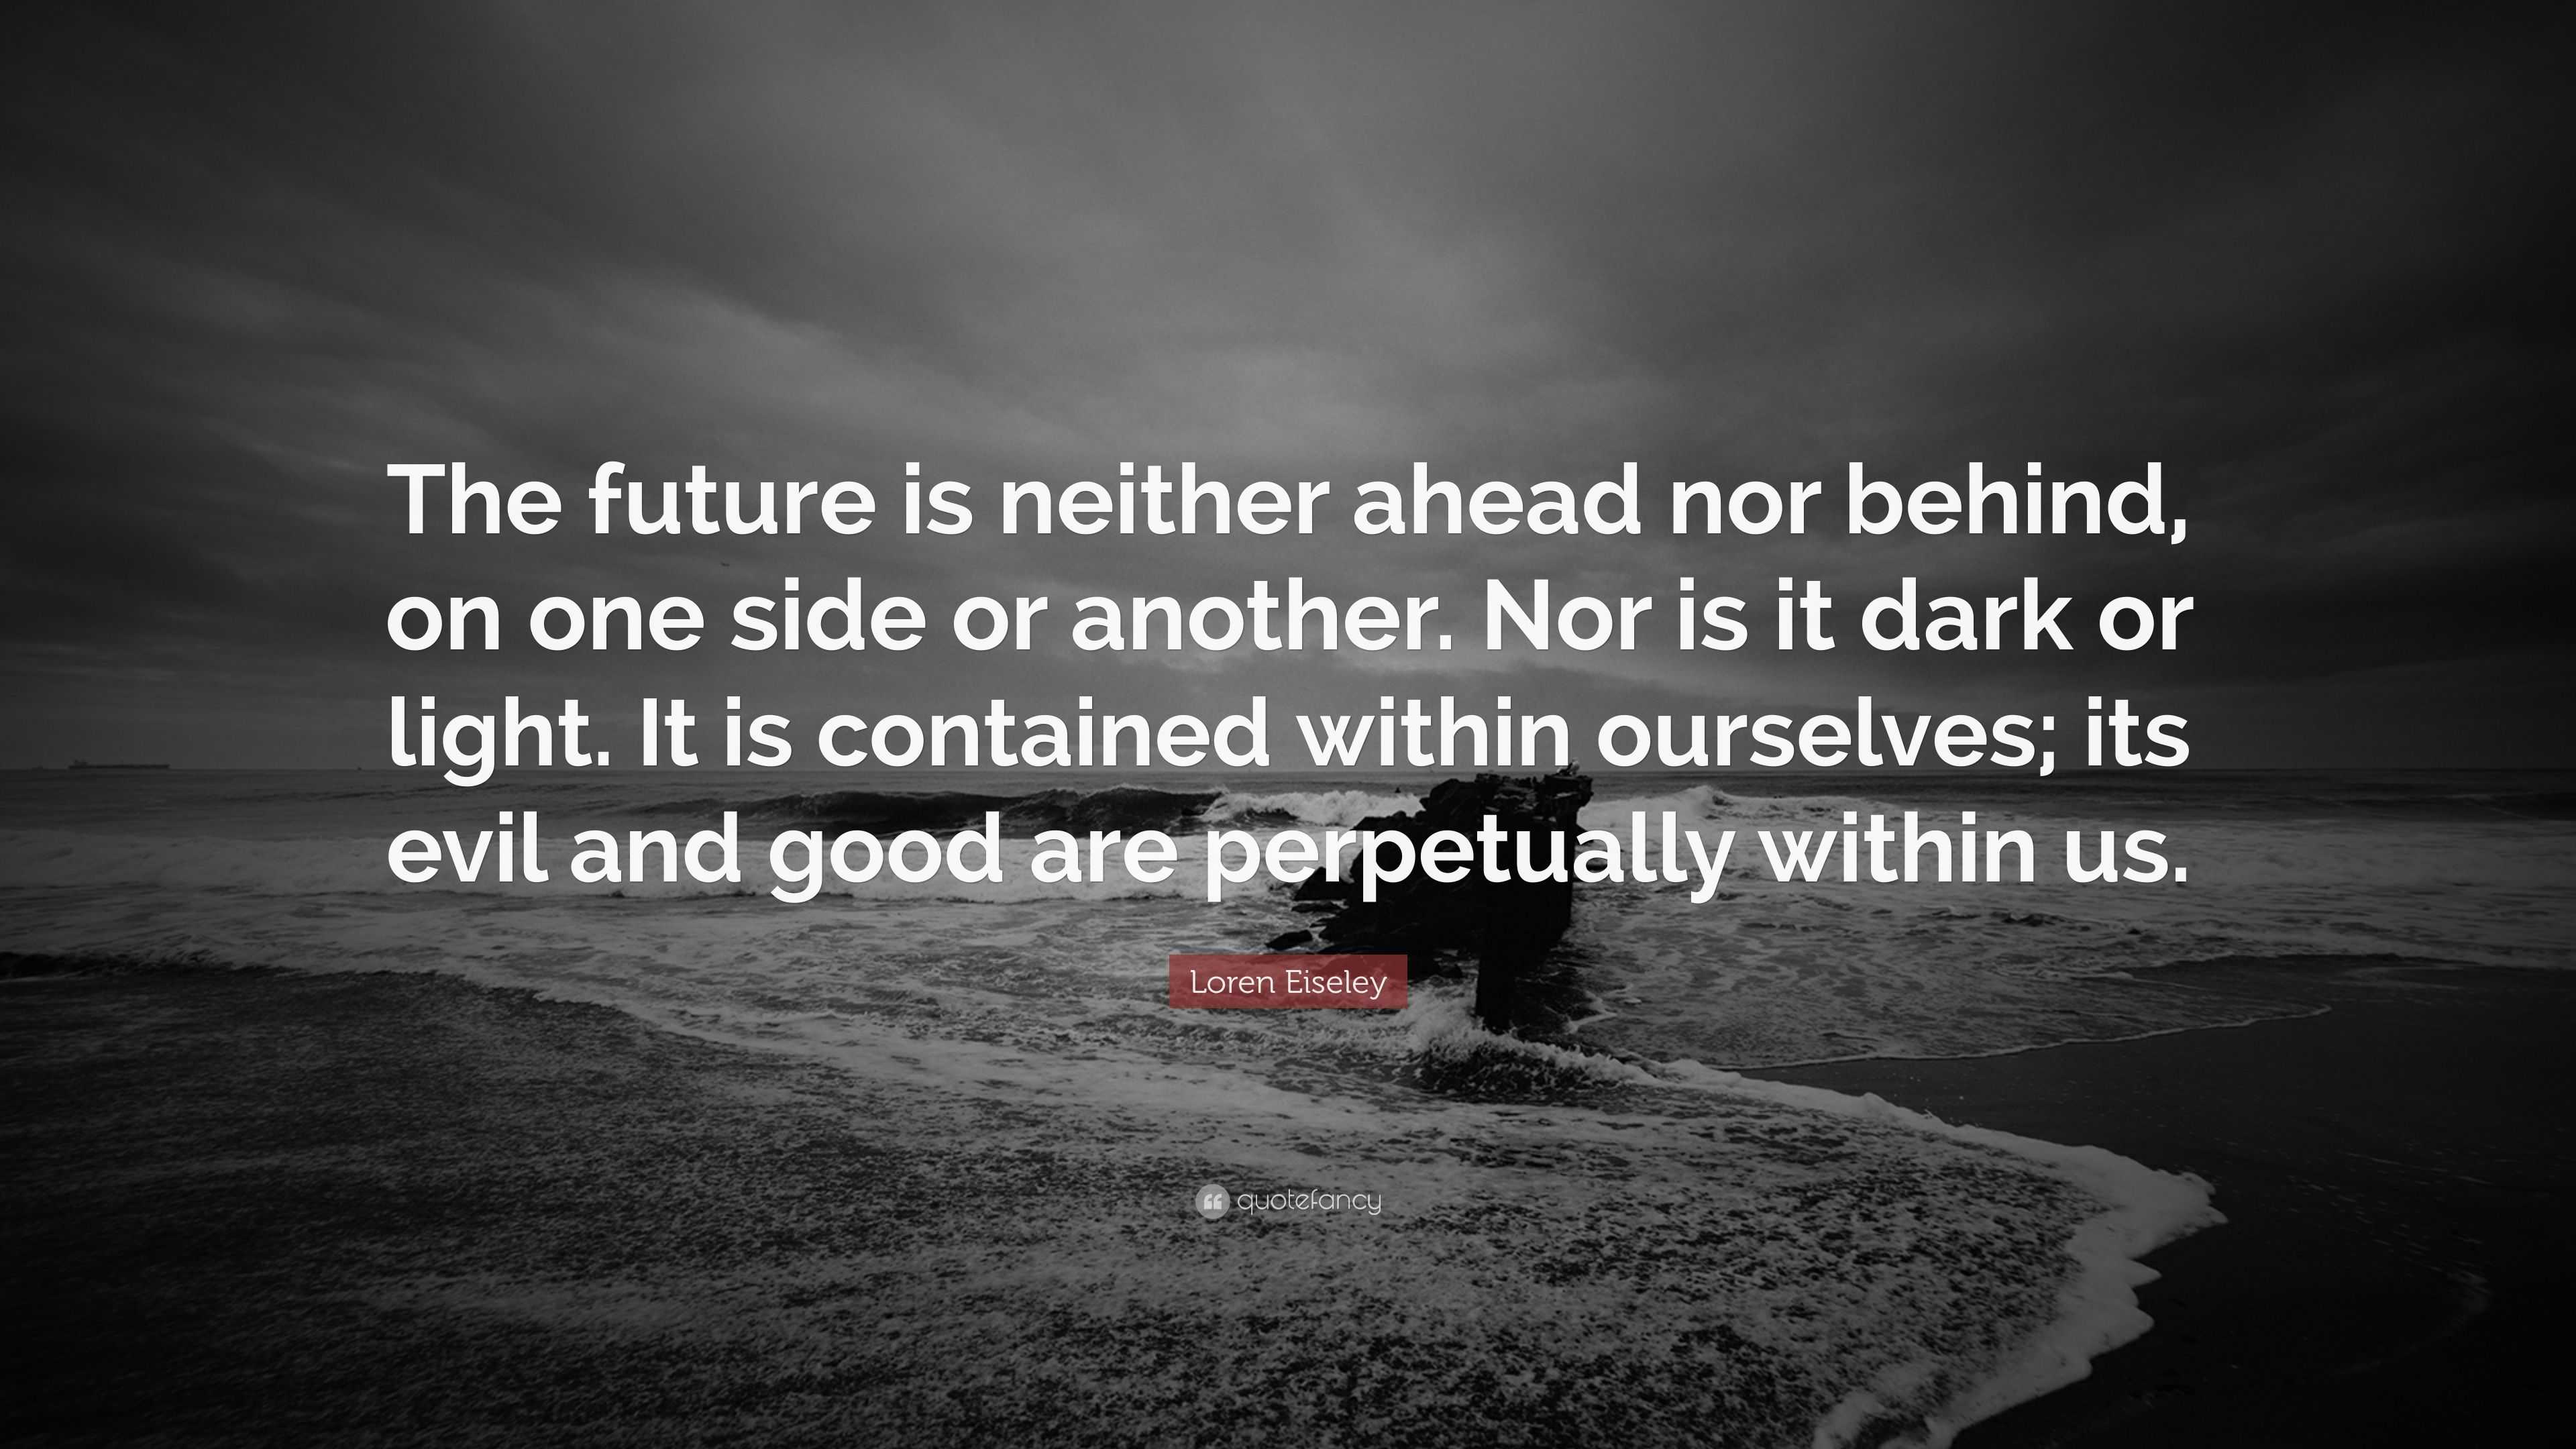 Loren Eiseley Quote: “The future is neither ahead nor behind, on one ...